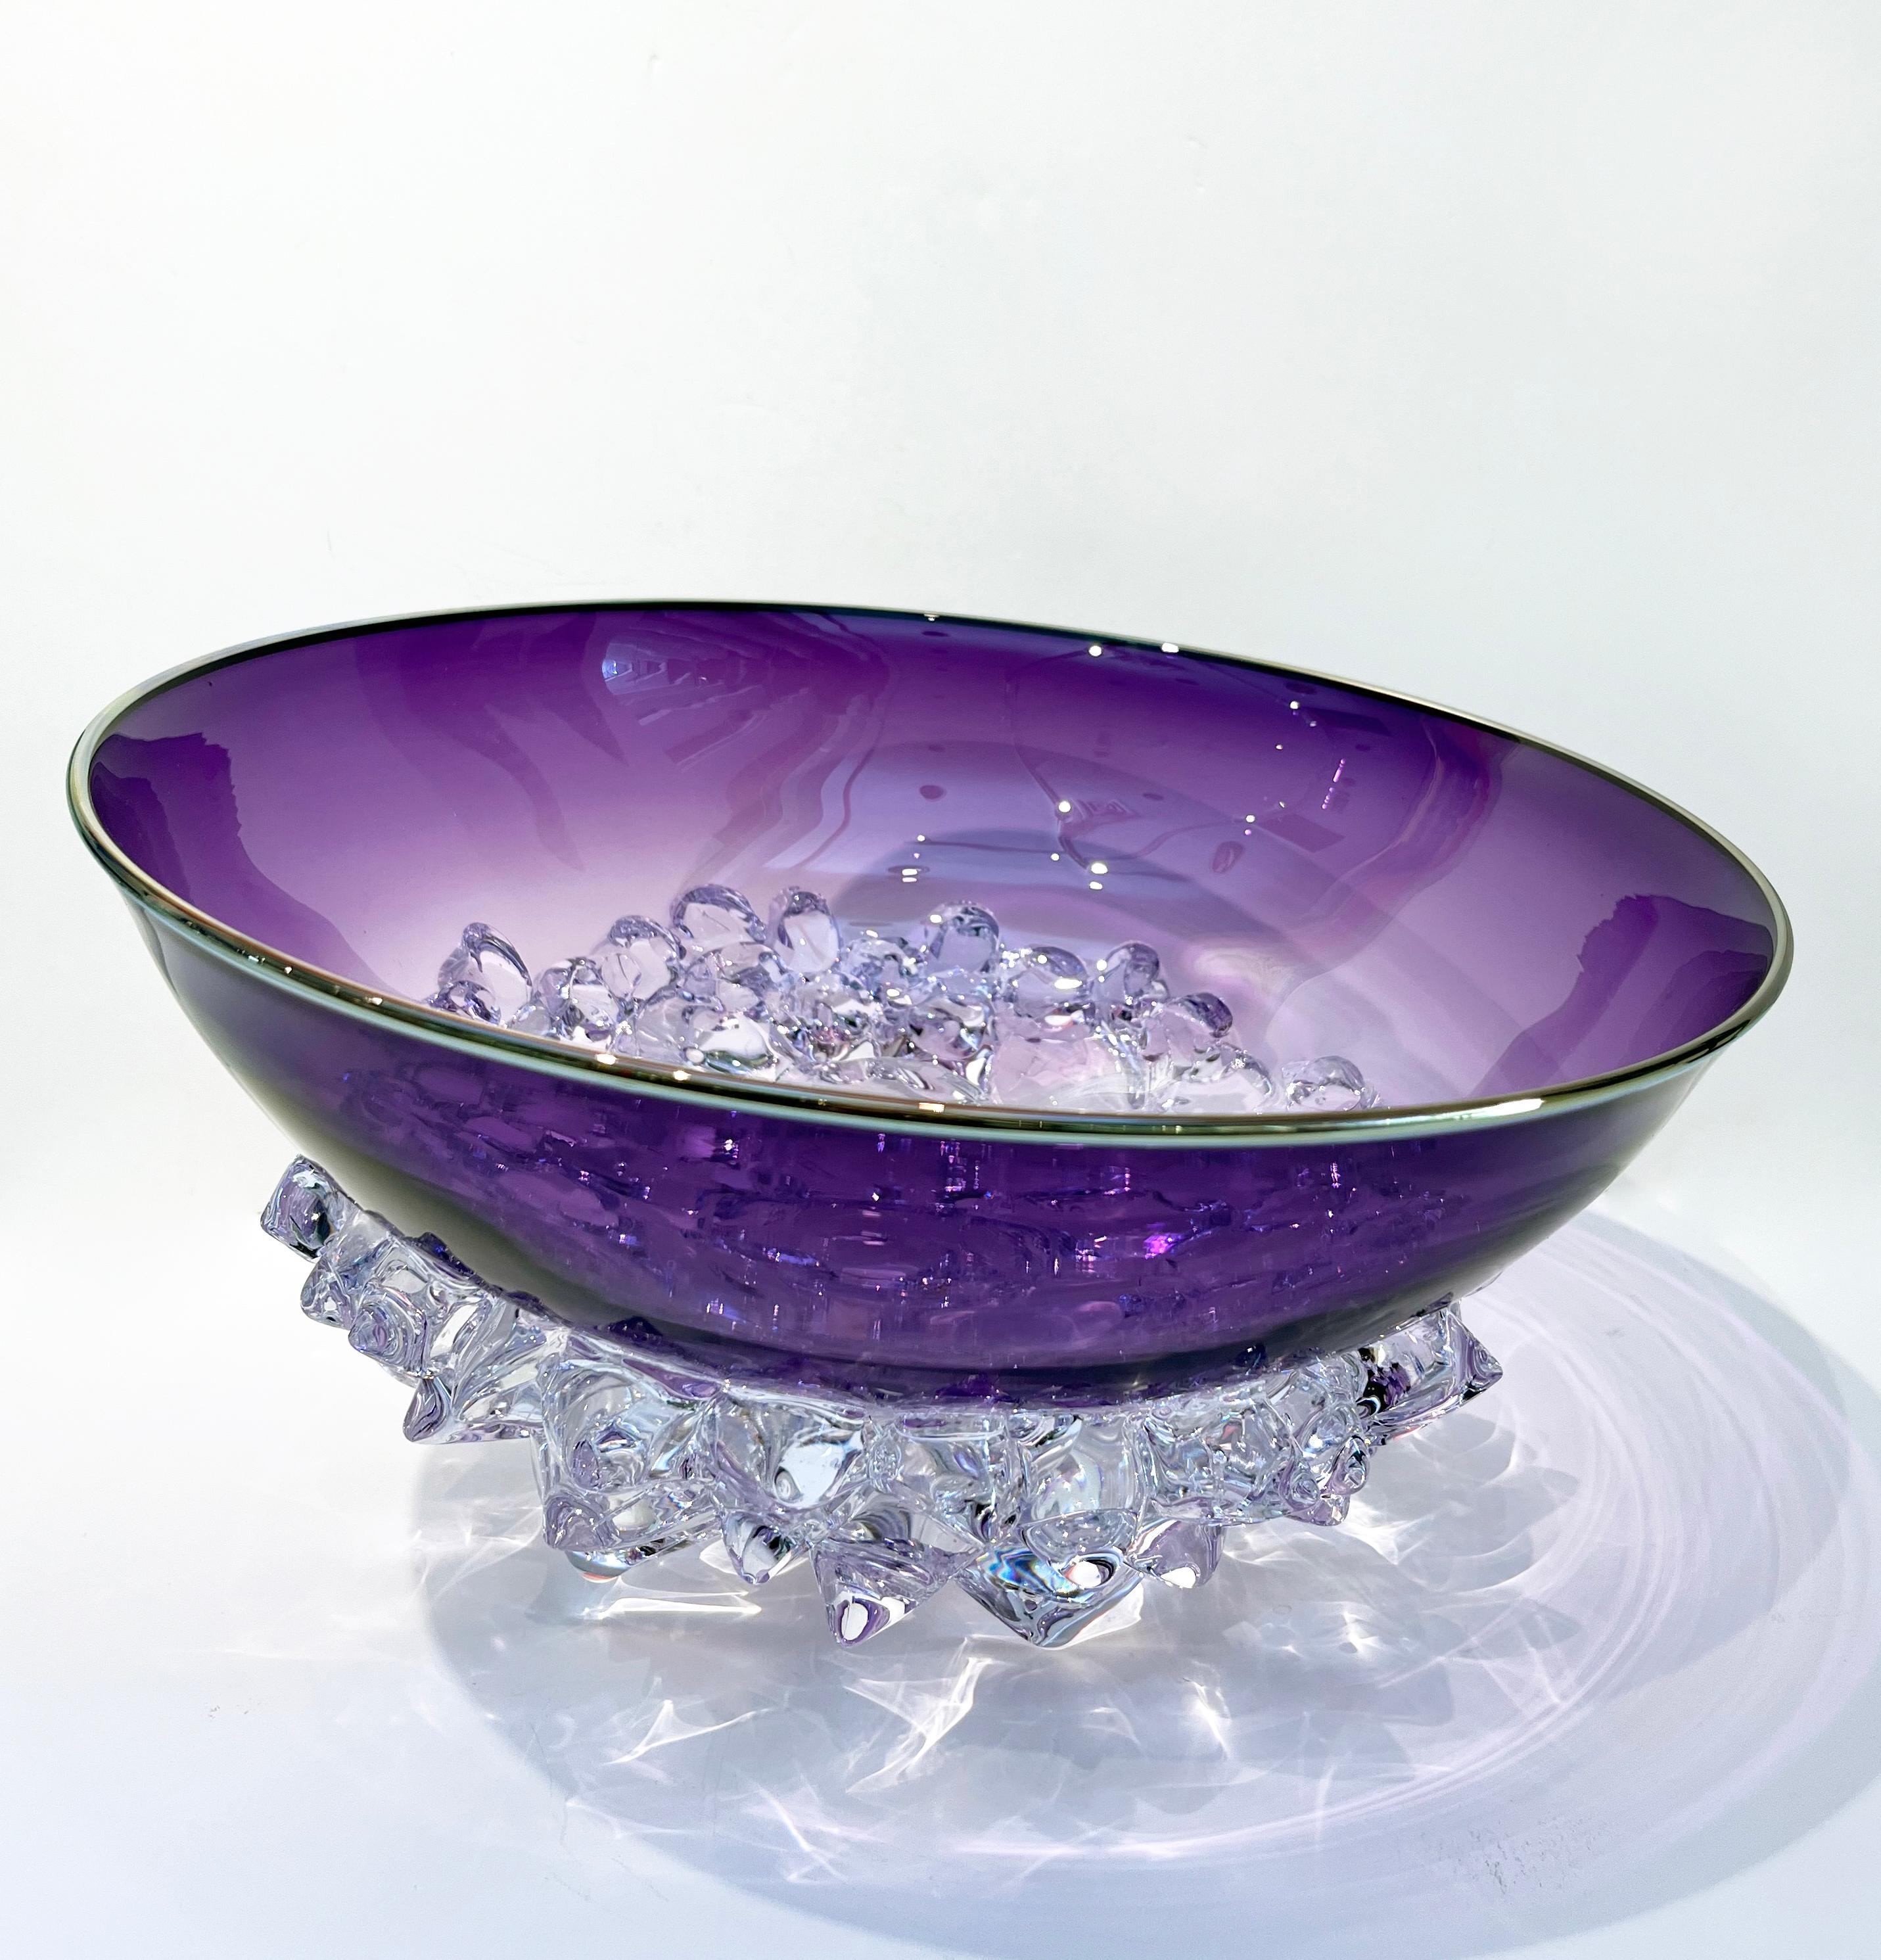 Andrew Madvin Abstract Sculpture - 13.5" Glass tilted thorn vessel, purple, amethyst, art glass bowl